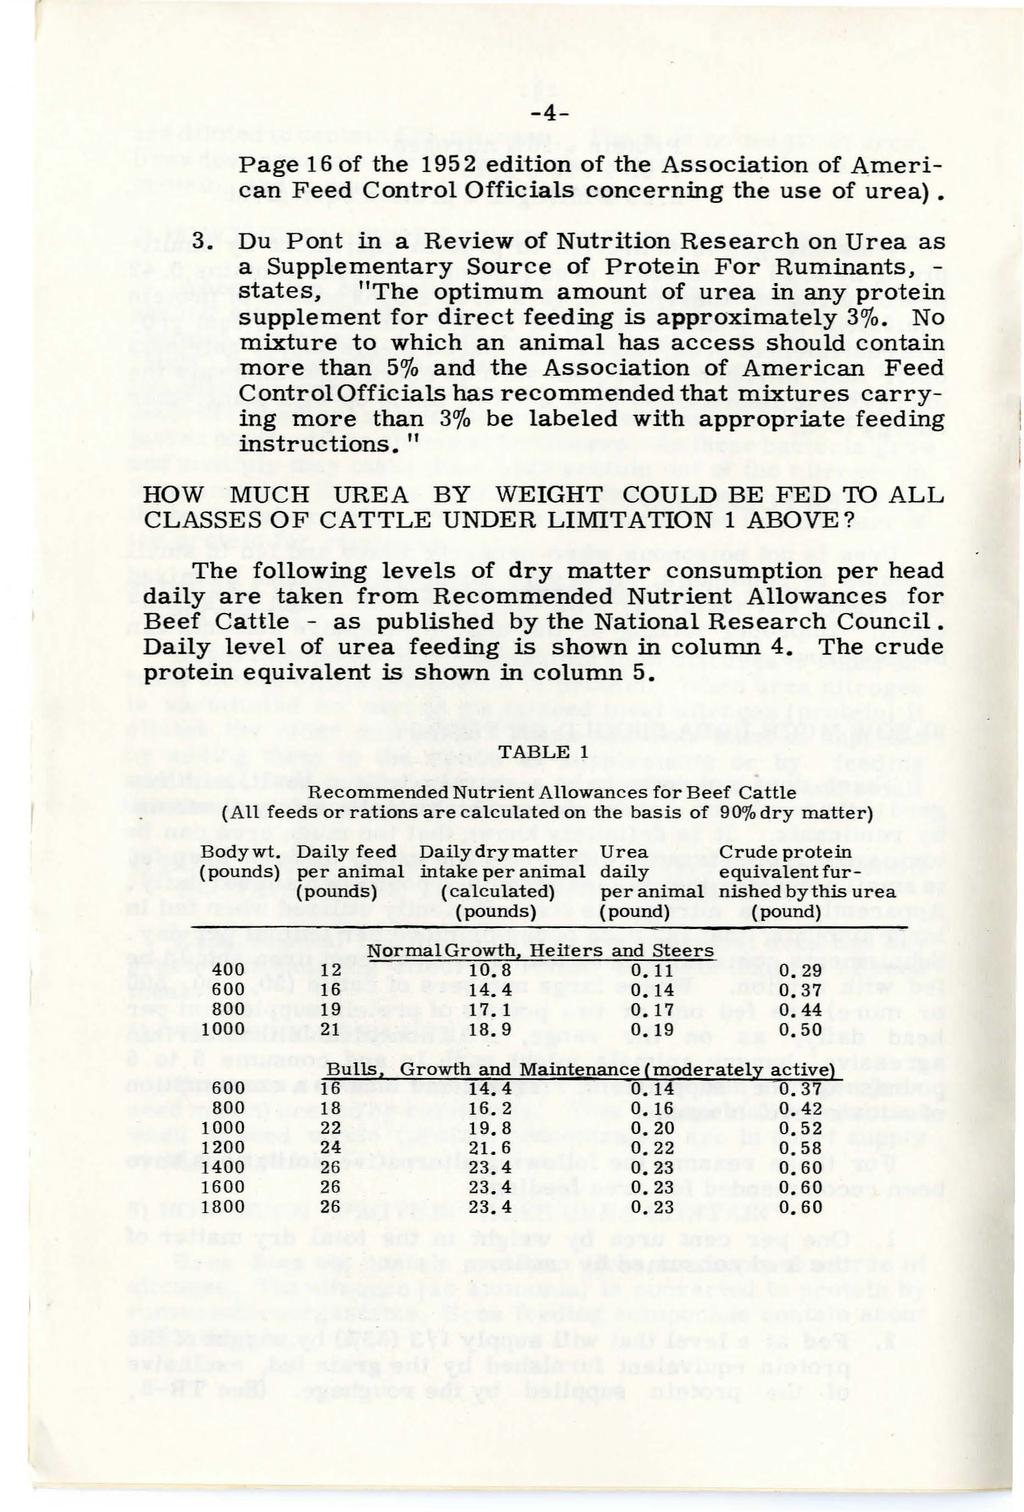 -4- Page 16 of the 1952 edition of the Association of American Feed Control Officials concerning the use of urea) 3.